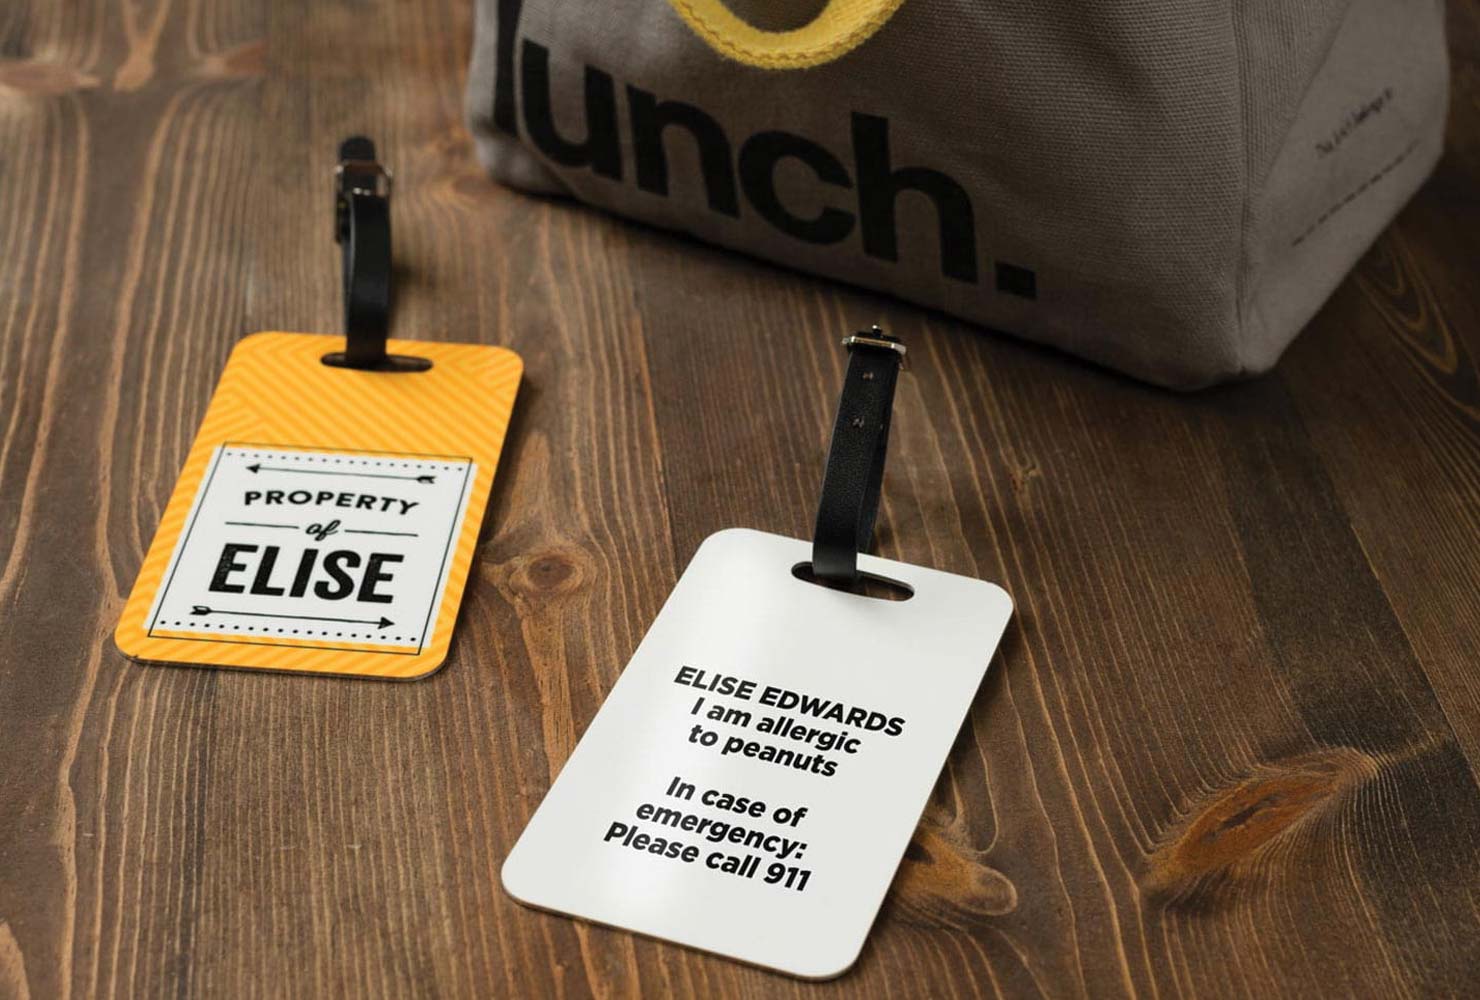 Lunch box tags.